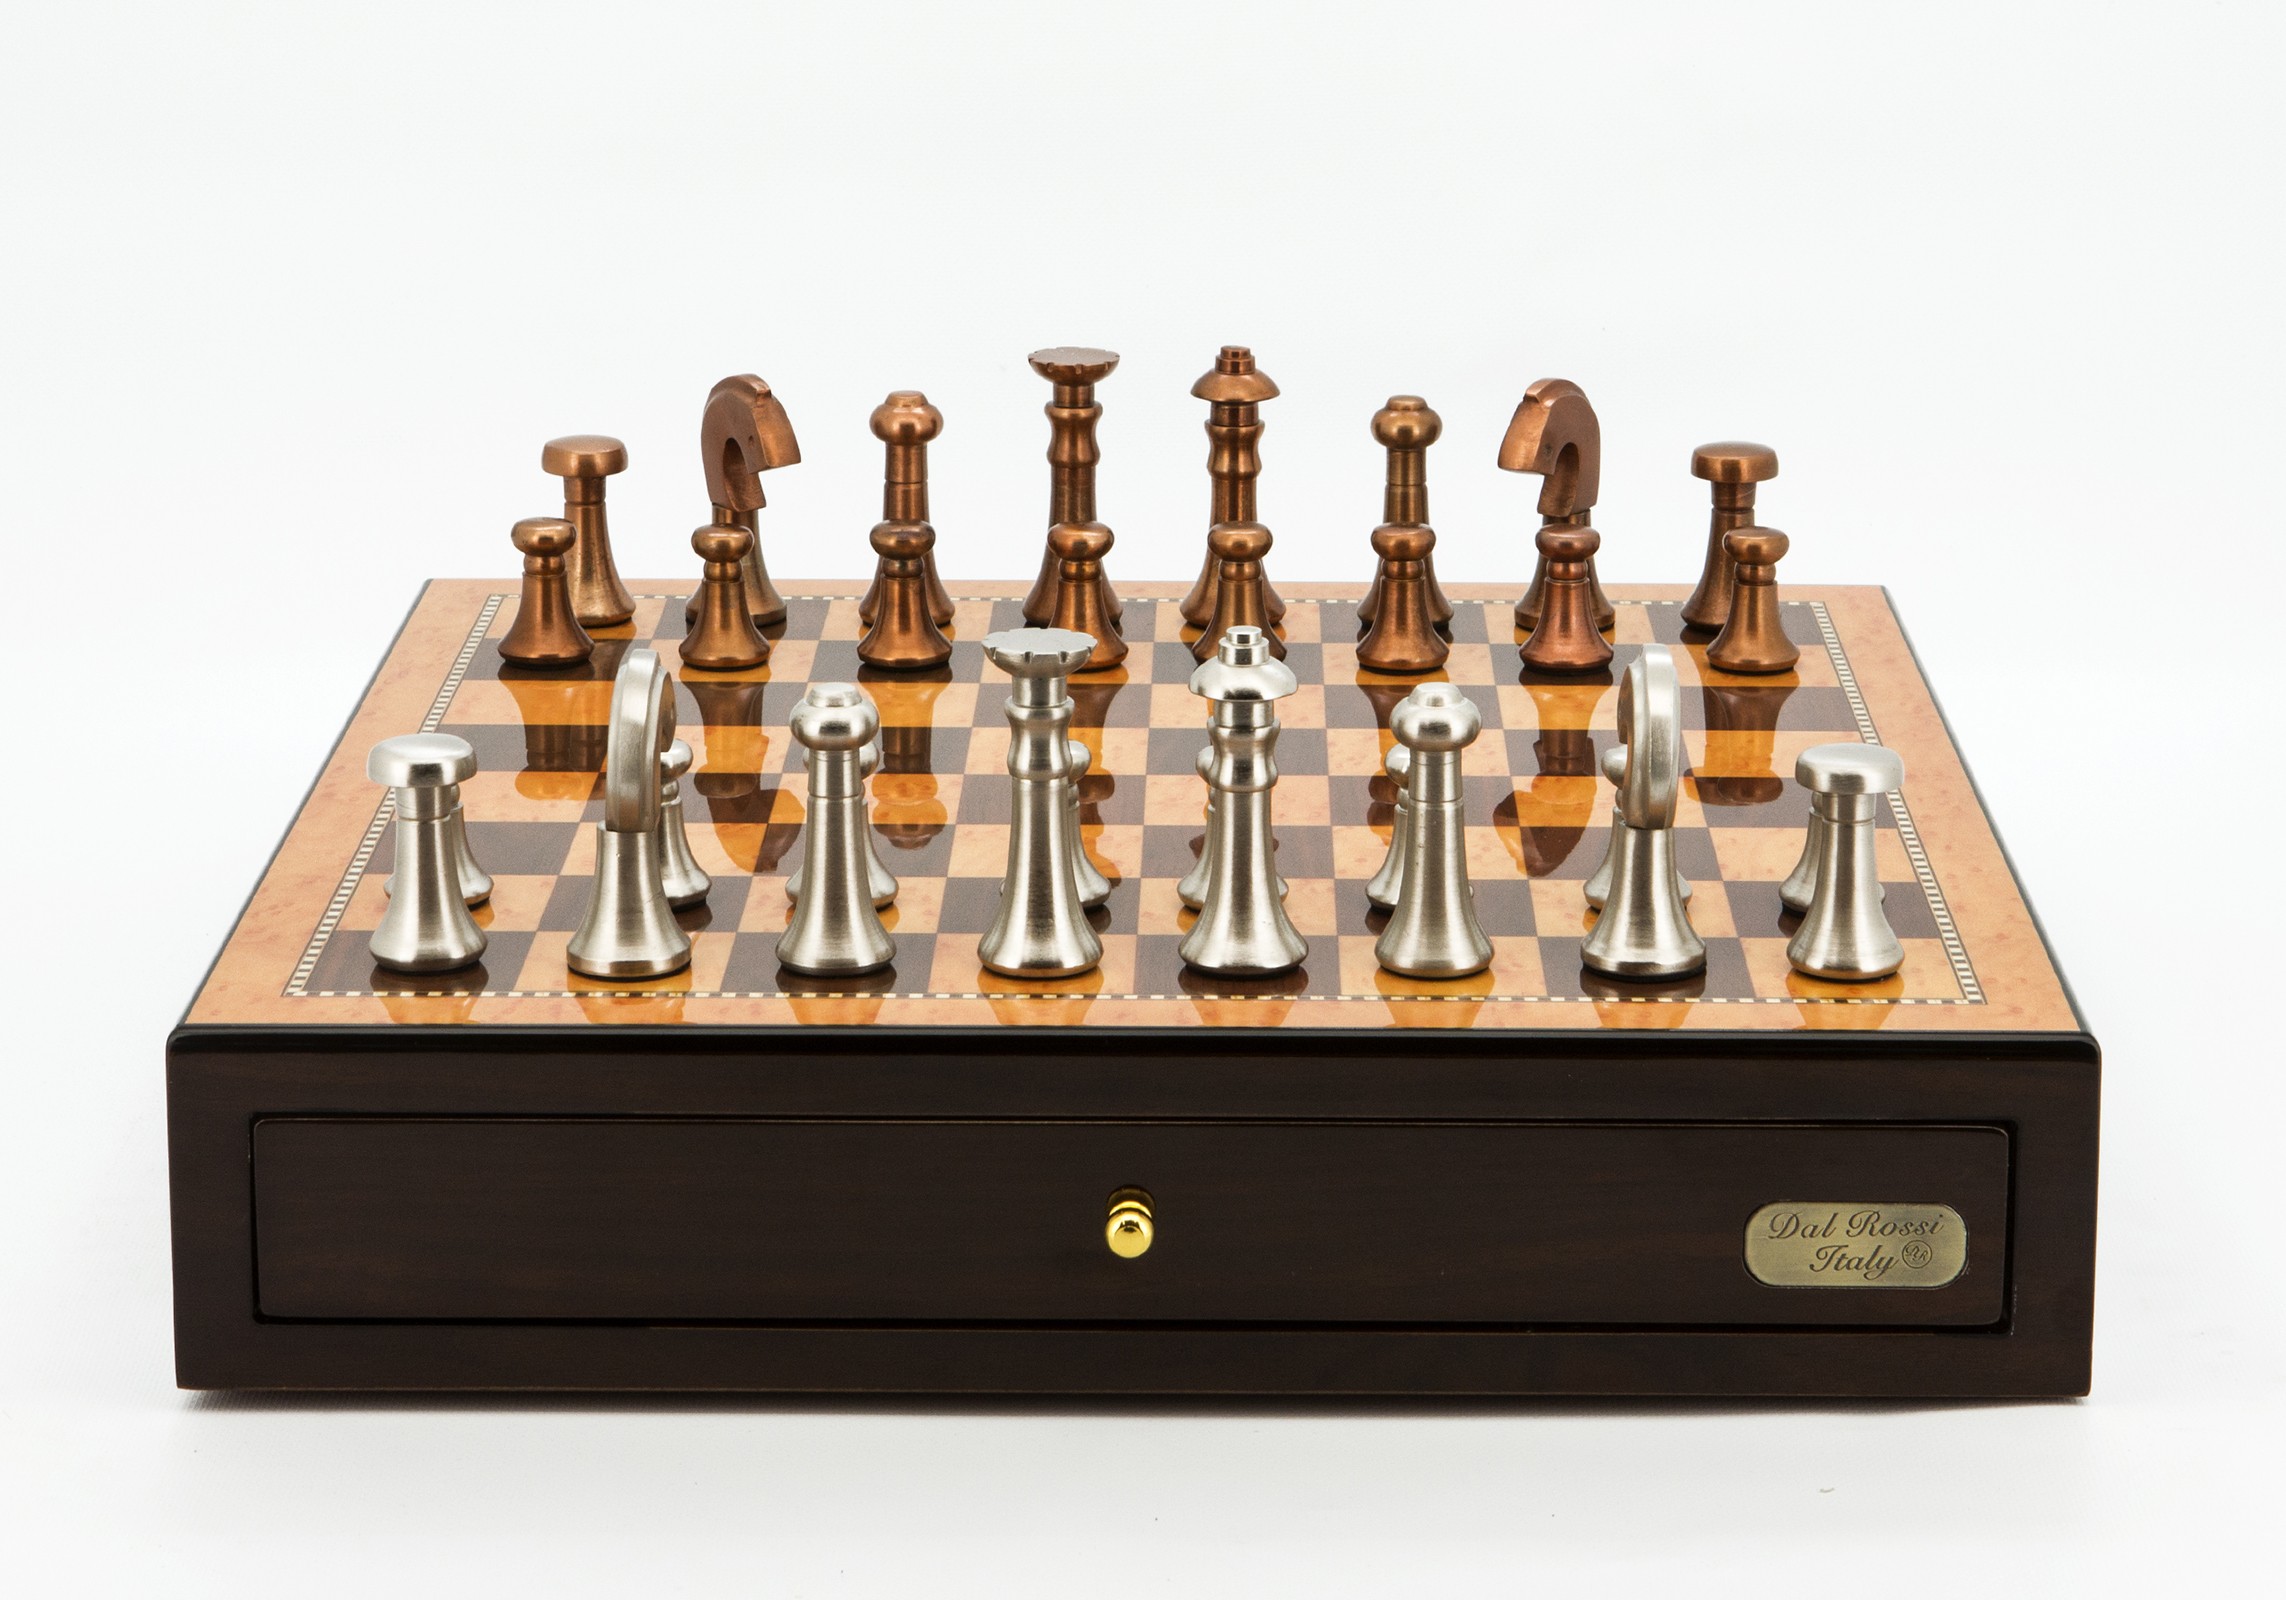 Dal Rossi Italy Chess Set Walnut Finish 18" With two Drawers, With Metal Copper and silver Chessmen 80mm